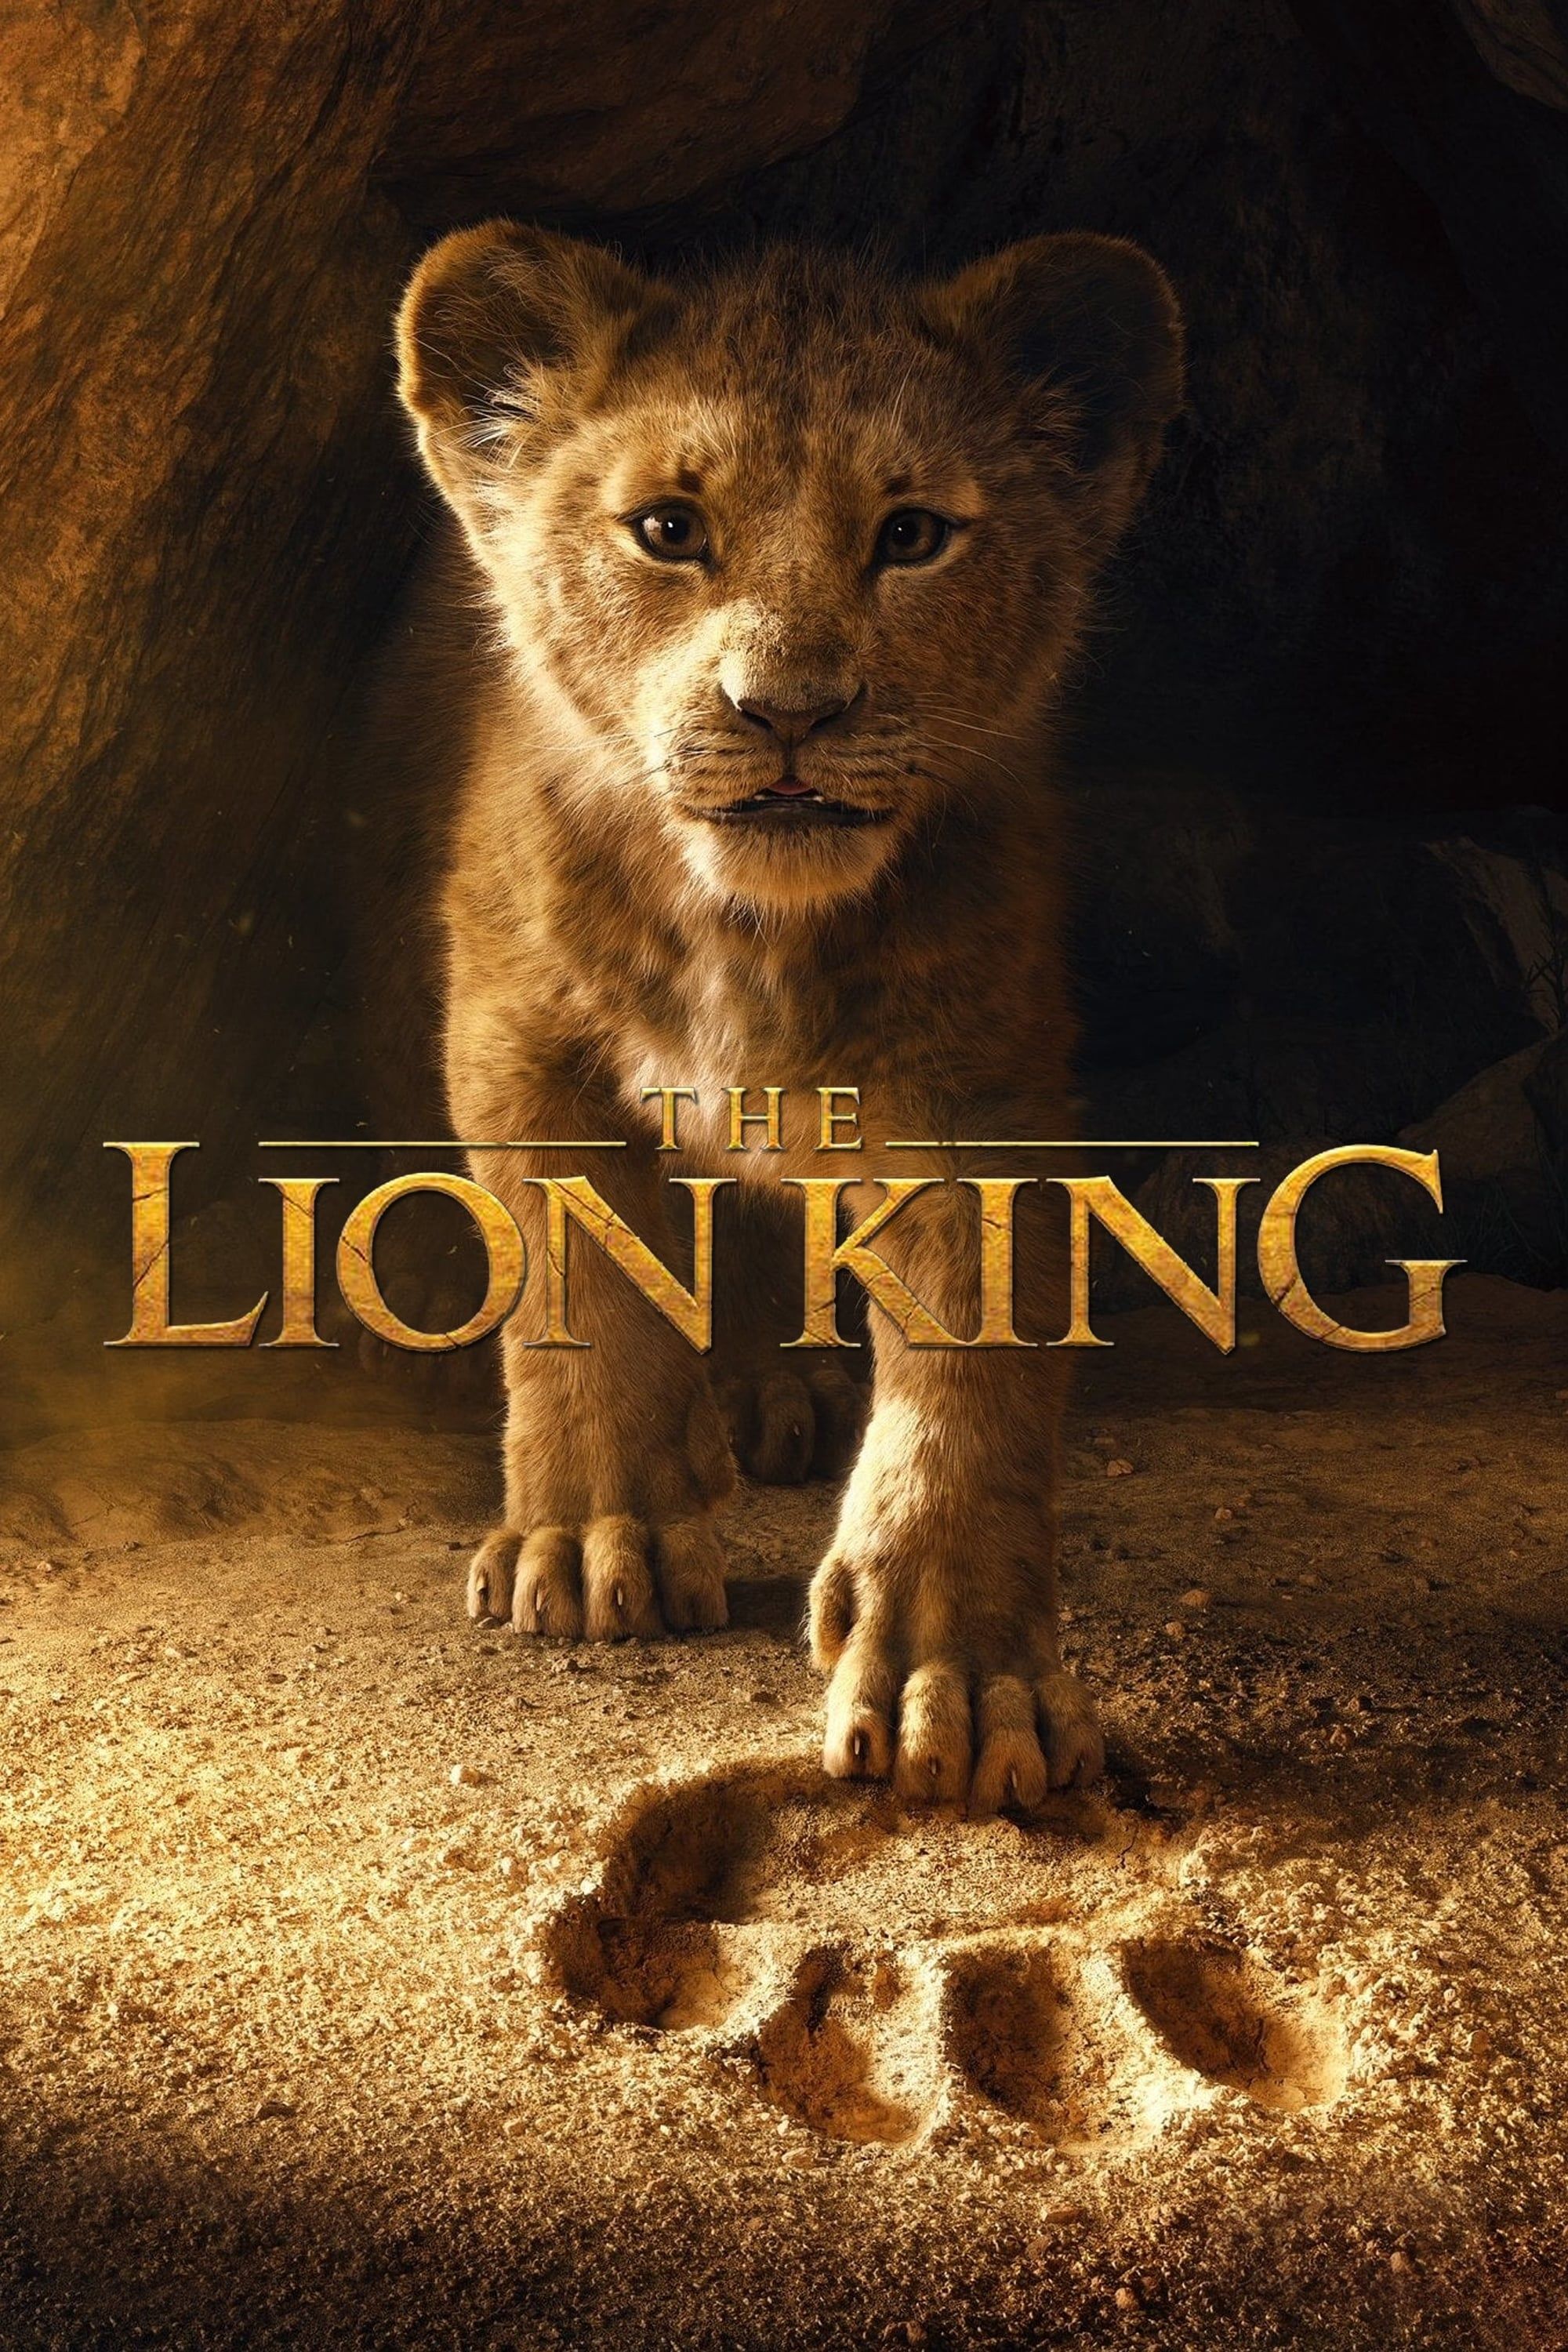 The Lion King 19 Movieweb